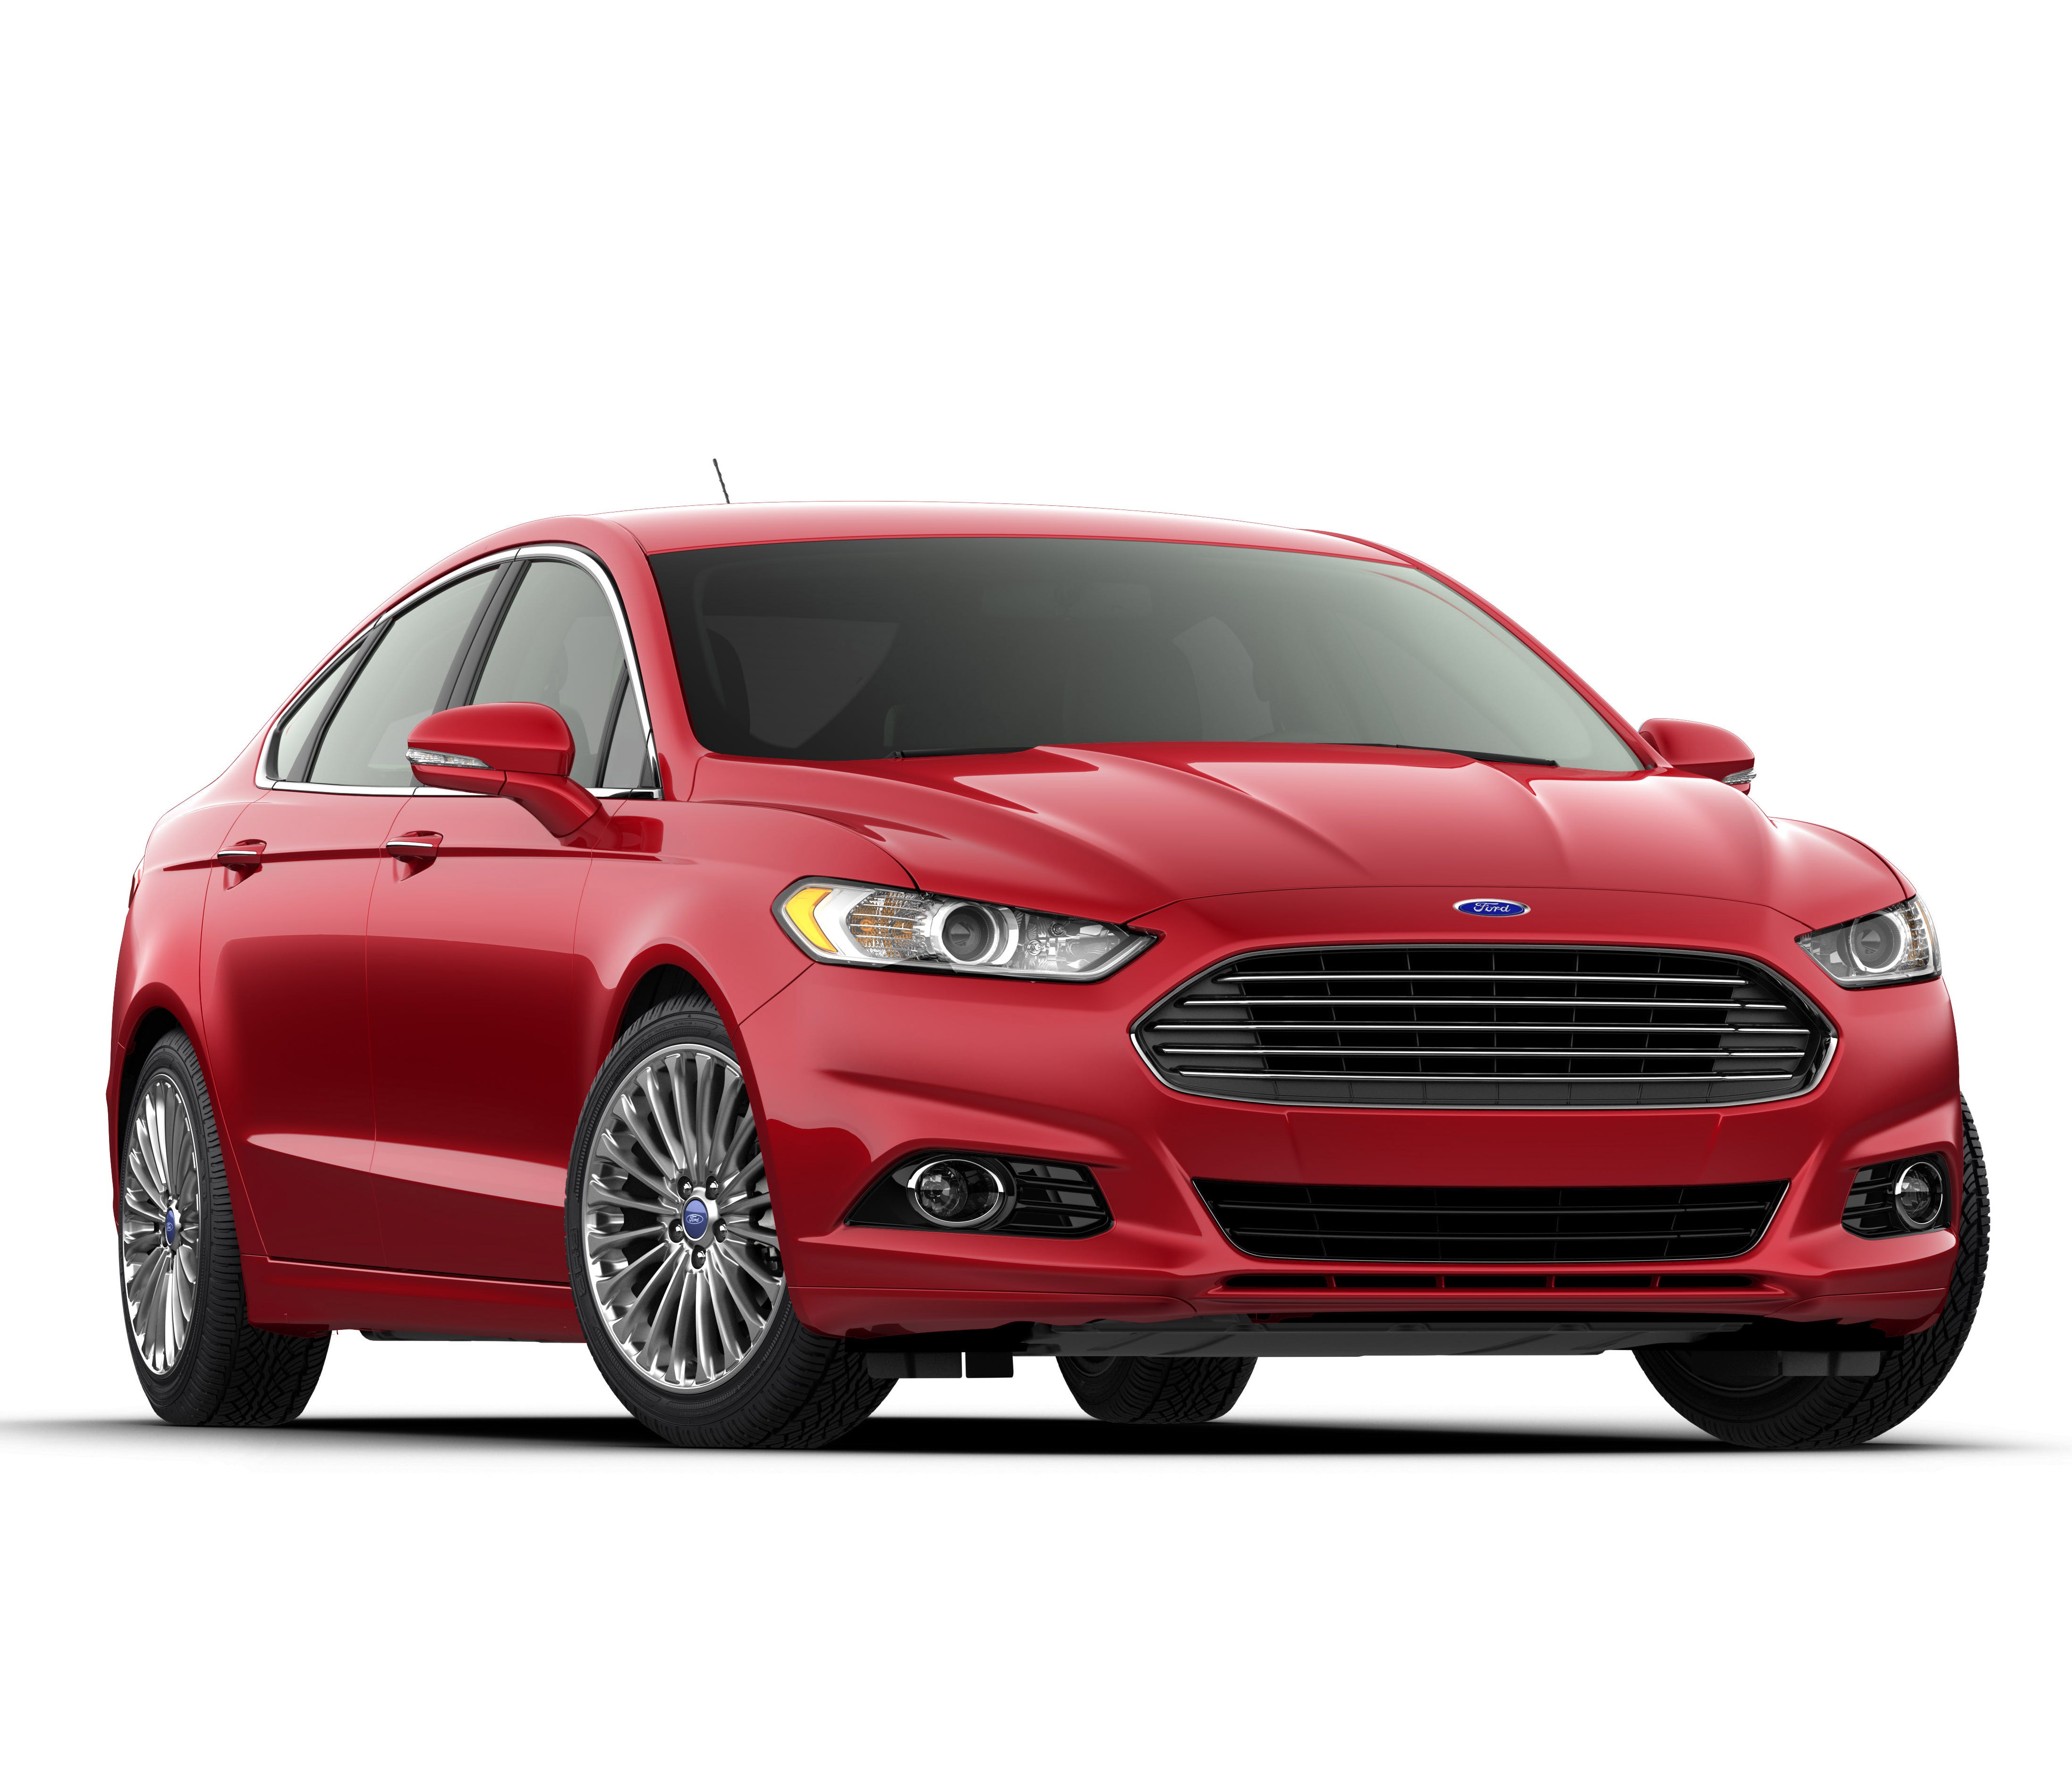 The Ford Fusion topped TrueCar list of average sticker discounts in February.